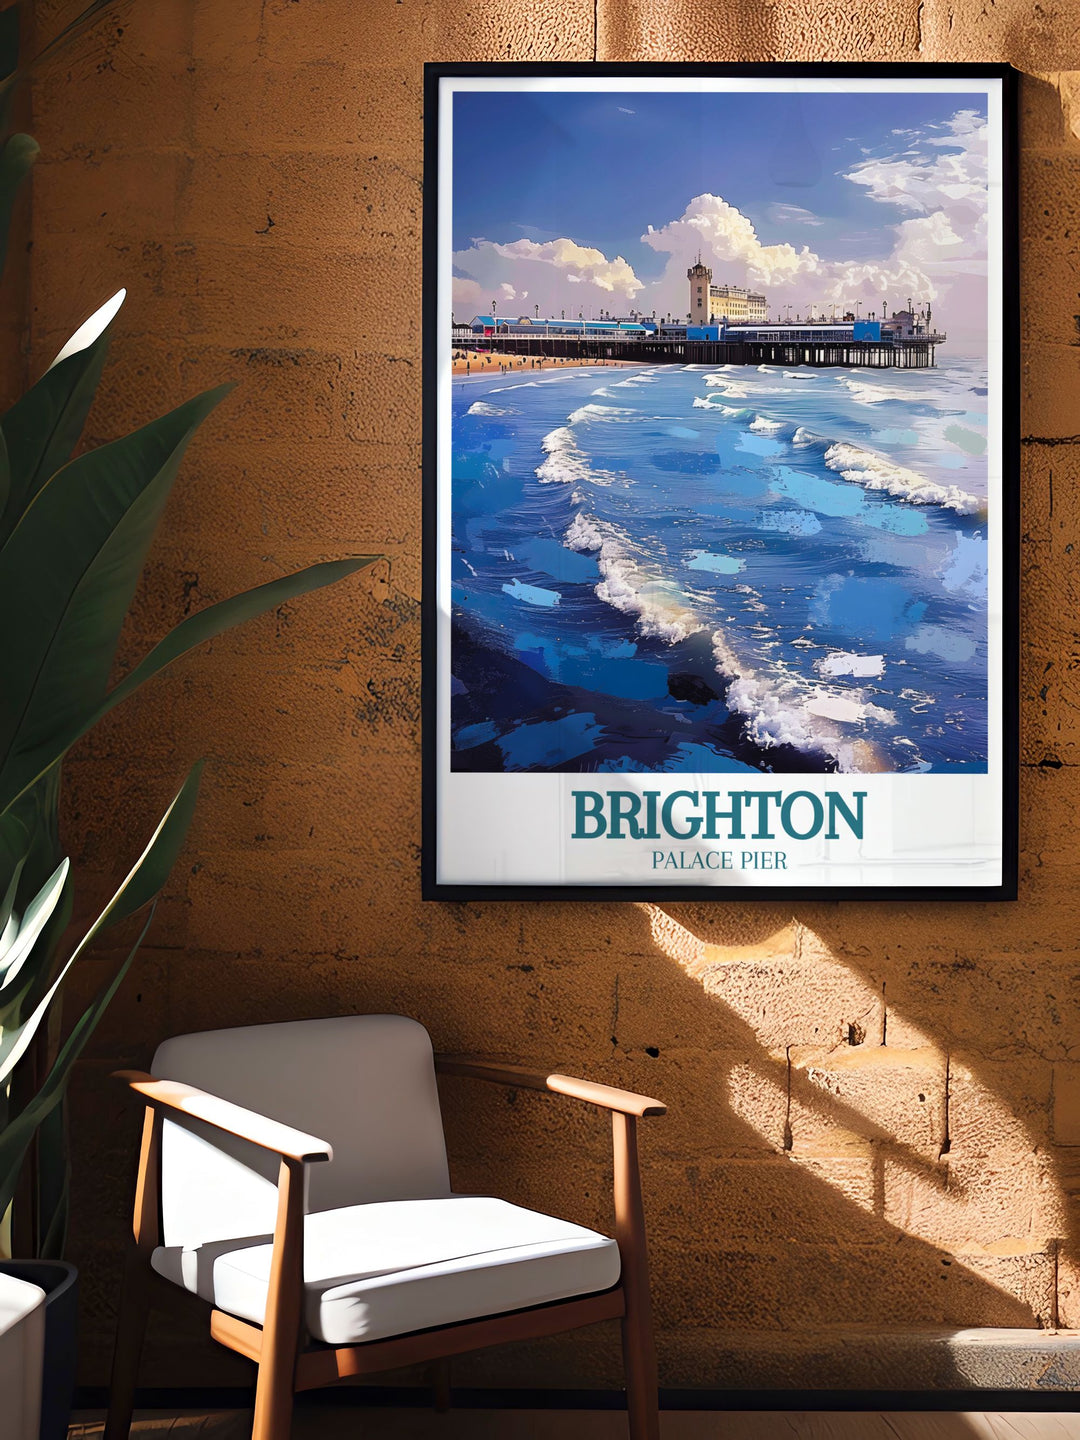 Brighton Palace Pier framed print highlighting the pier and the picturesque English Channel a must have vintage travel print for those who appreciate the charm of coastal scenes and nostalgic art.